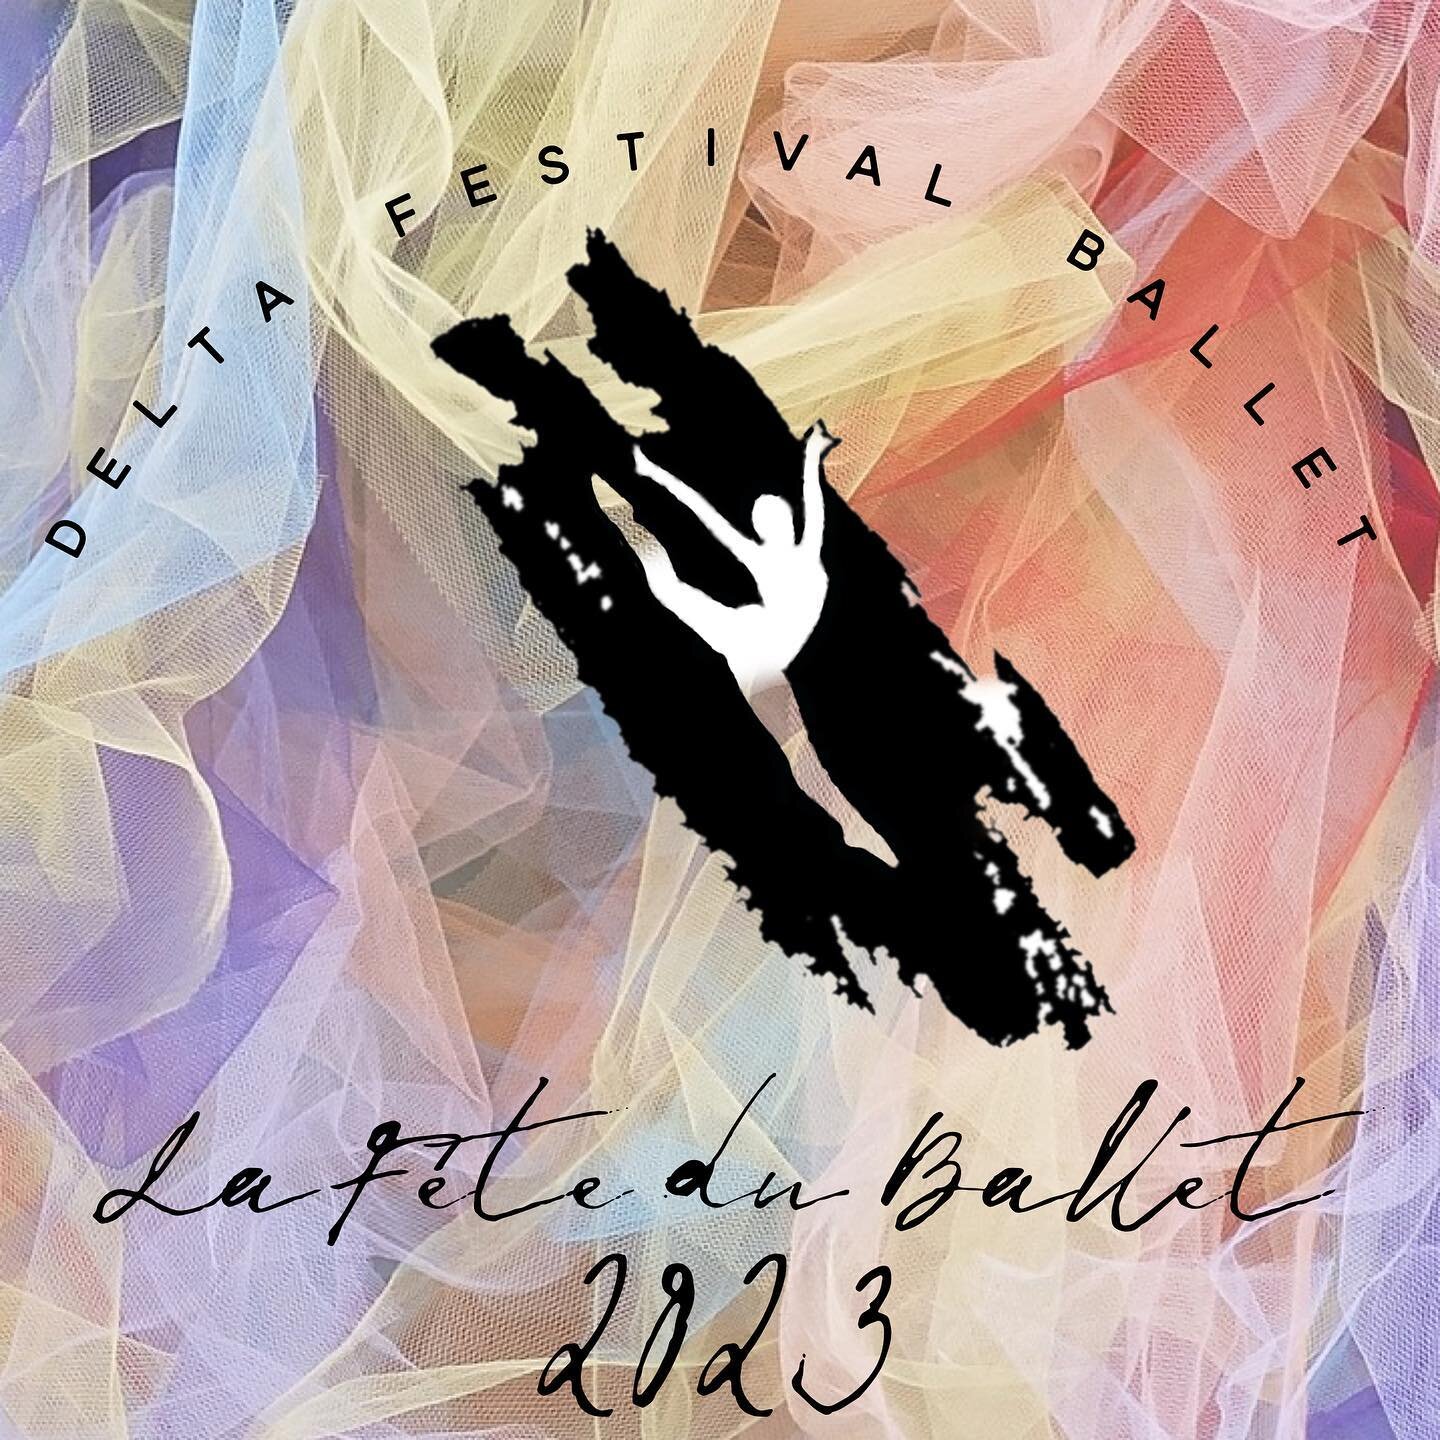 We are fools whether we dance or not, so we may as well dance! 

Join us for La Fete du Ballet on April 1, 2023 as we honor our artistic director, Joseph Giacobbe. 🩰🩰🩰🩰

Tickets available at www.deltafestivalballet.com. 

@thealexanderroom #balle